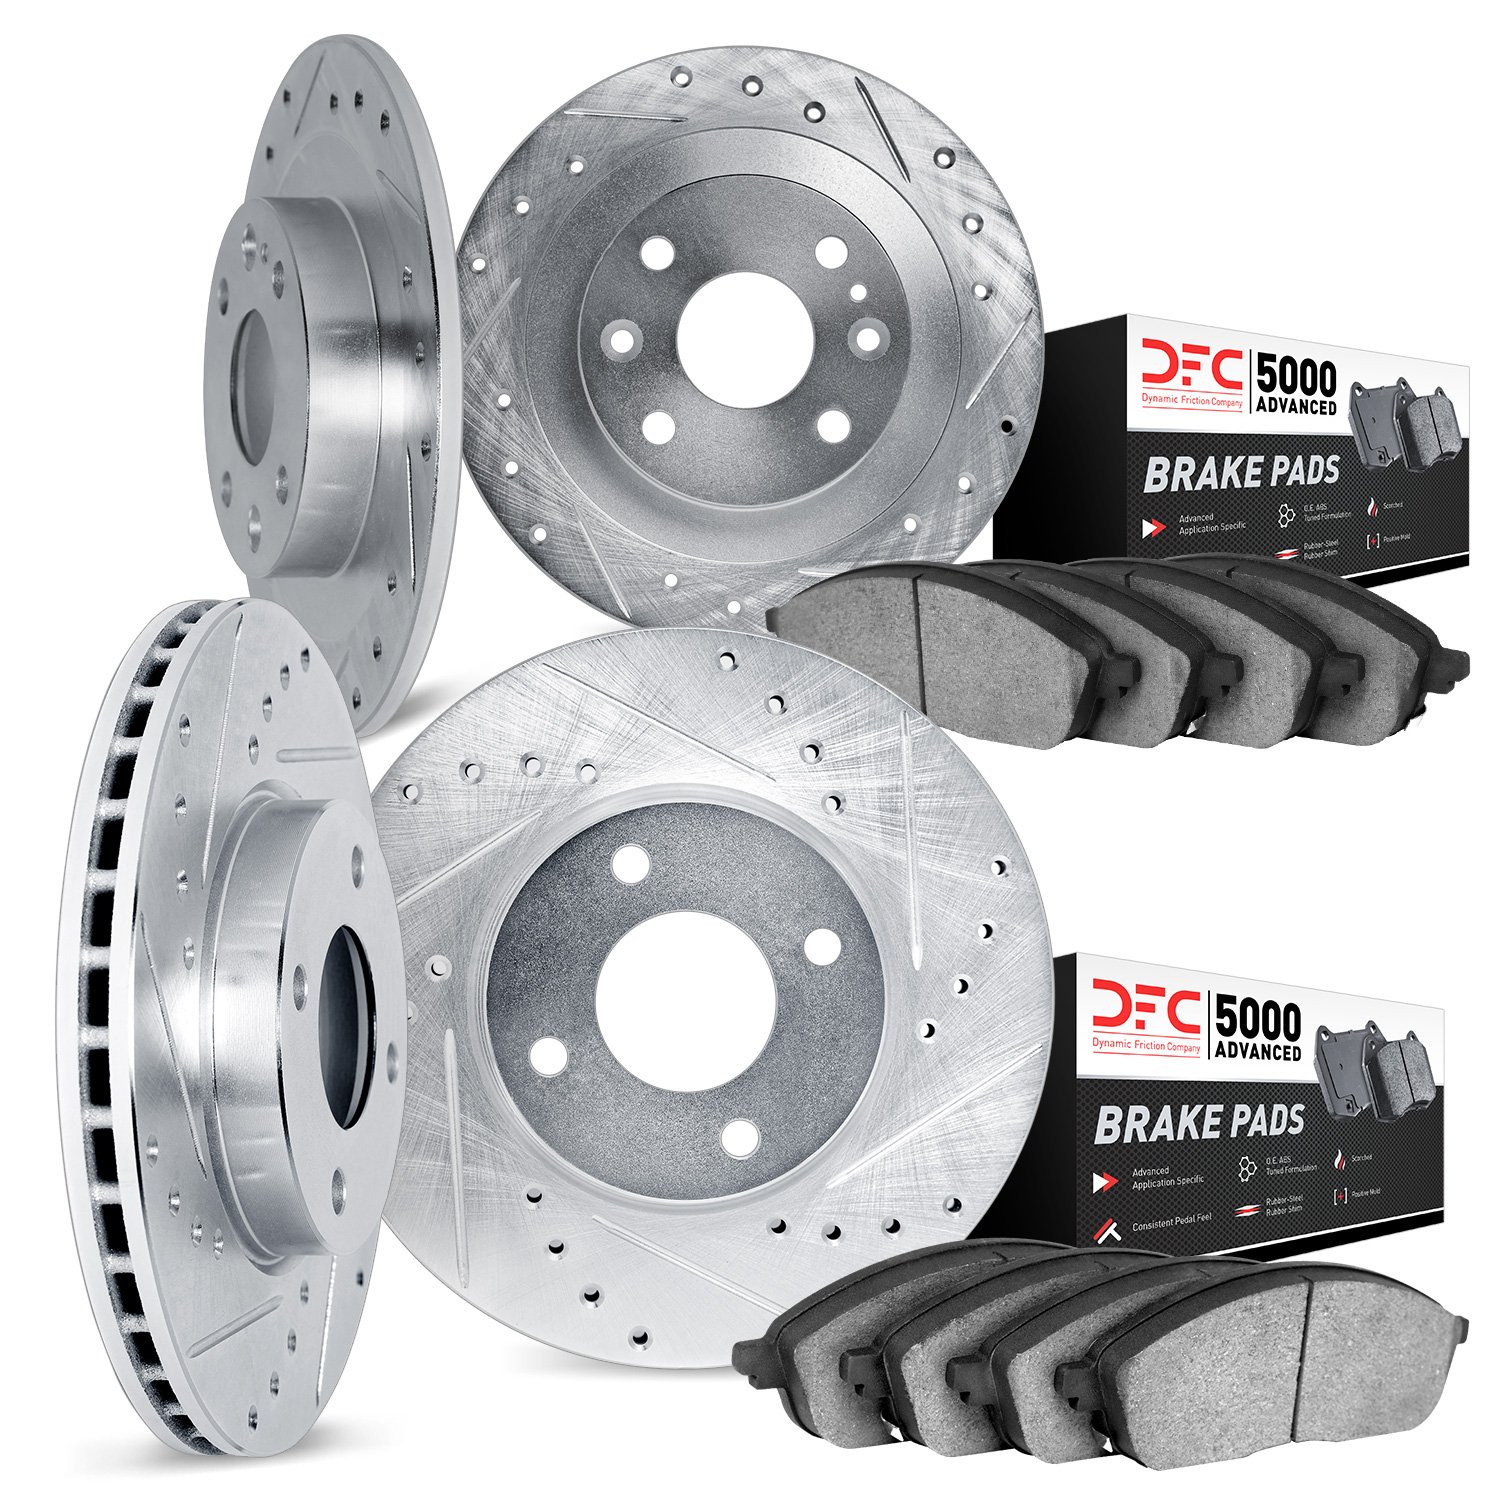 7504-72030 Drilled/Slotted Brake Rotors w/5000 Advanced Brake Pads Kit [Silver], 1988-1990 Mopar, Position: Front and Rear